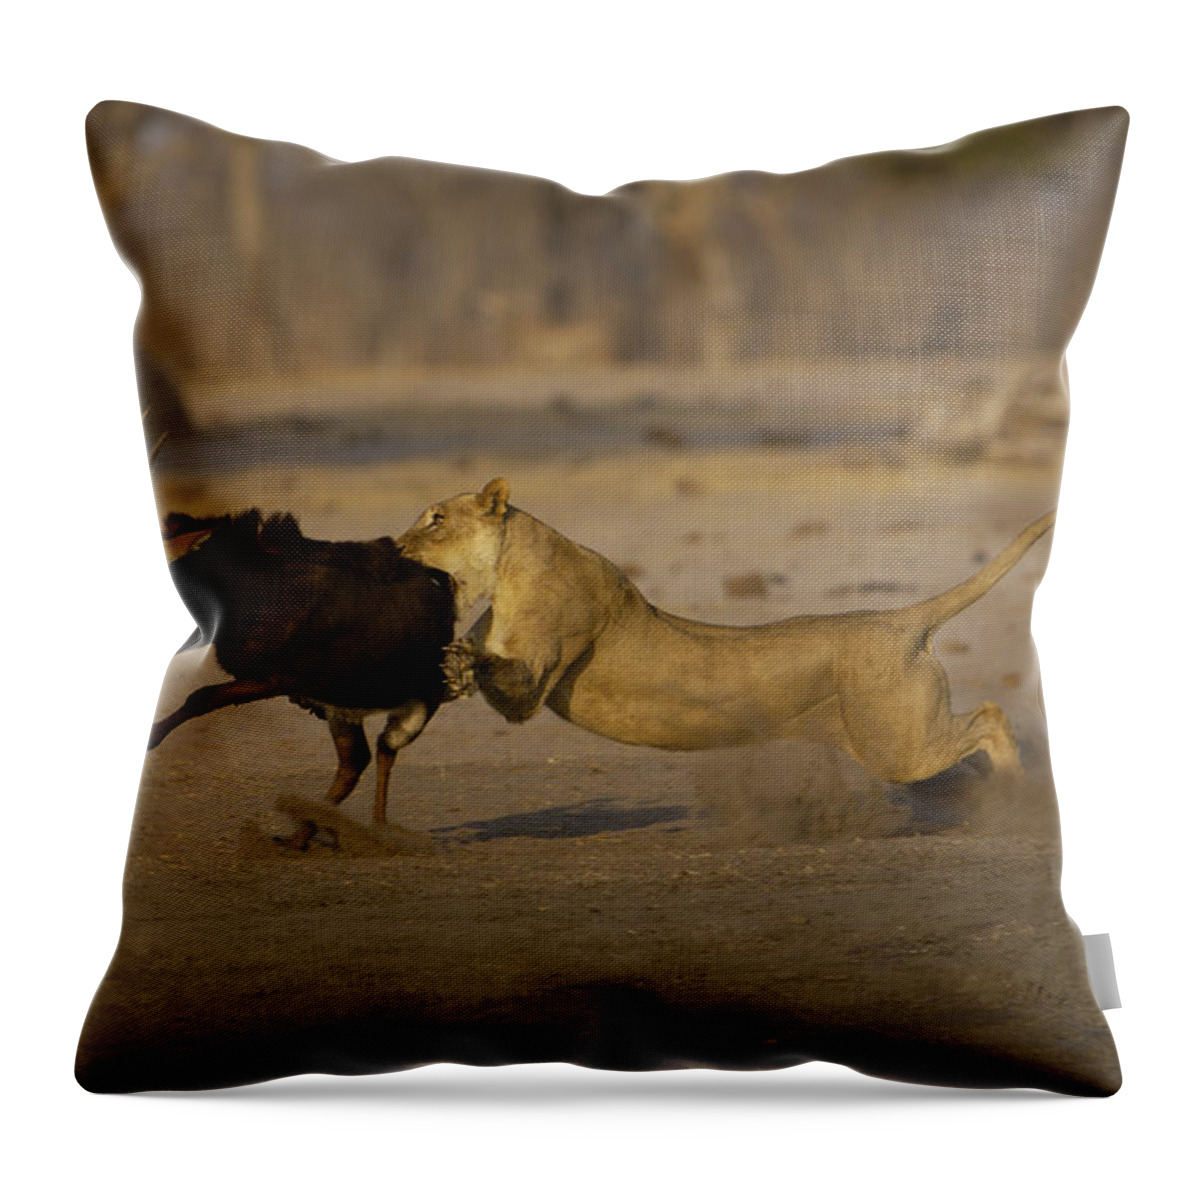 Feb0514 Throw Pillow featuring the photograph African Lioness Attacking Sable by Pete Oxford